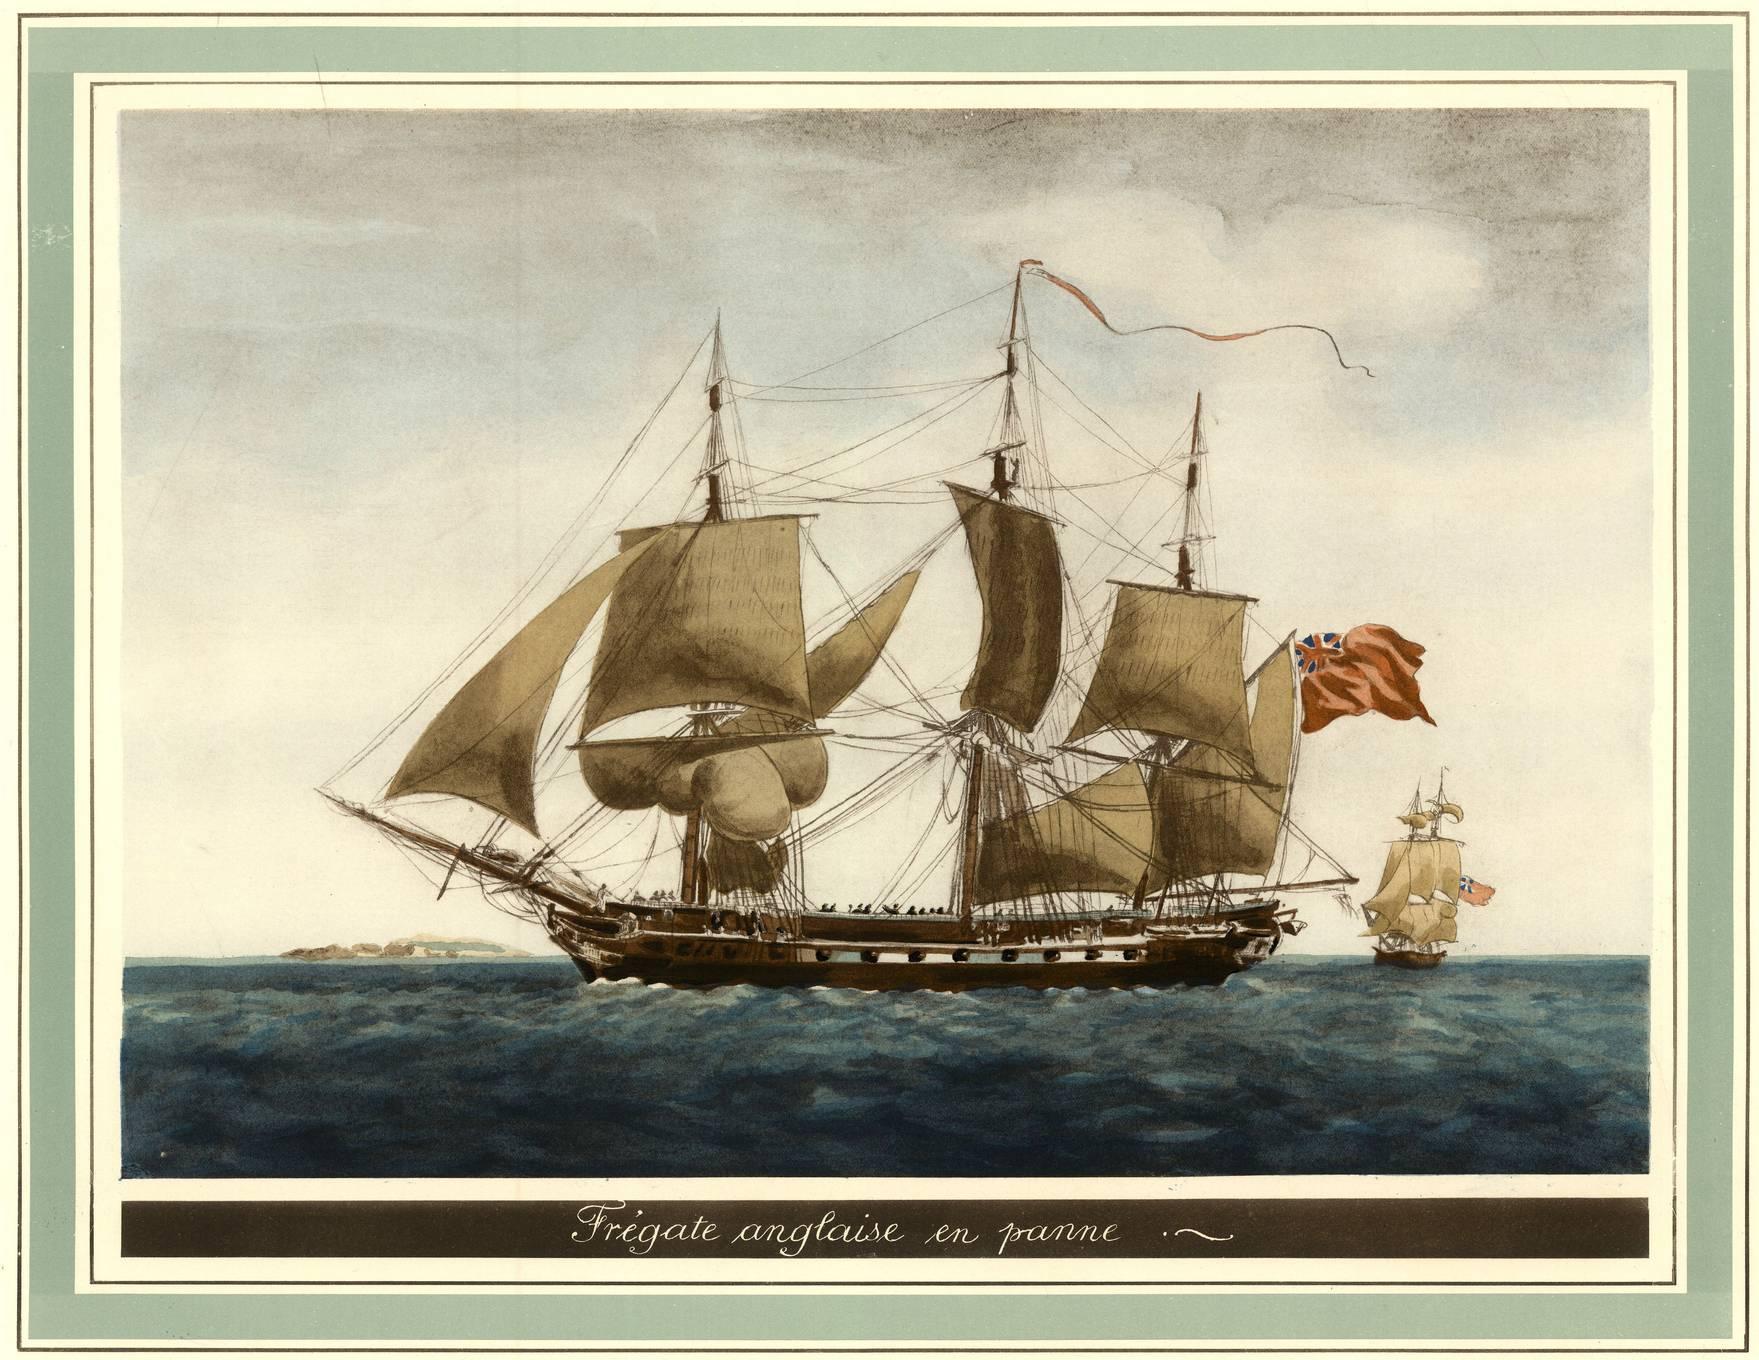 Handcolored heliotype of an English ship after a work of Jean-Jérôme Baugean, created in circa 1920.

This original print is described as a handcolored heliotype, a technique that was developed in the 19th century as a photo-mechanical process. It